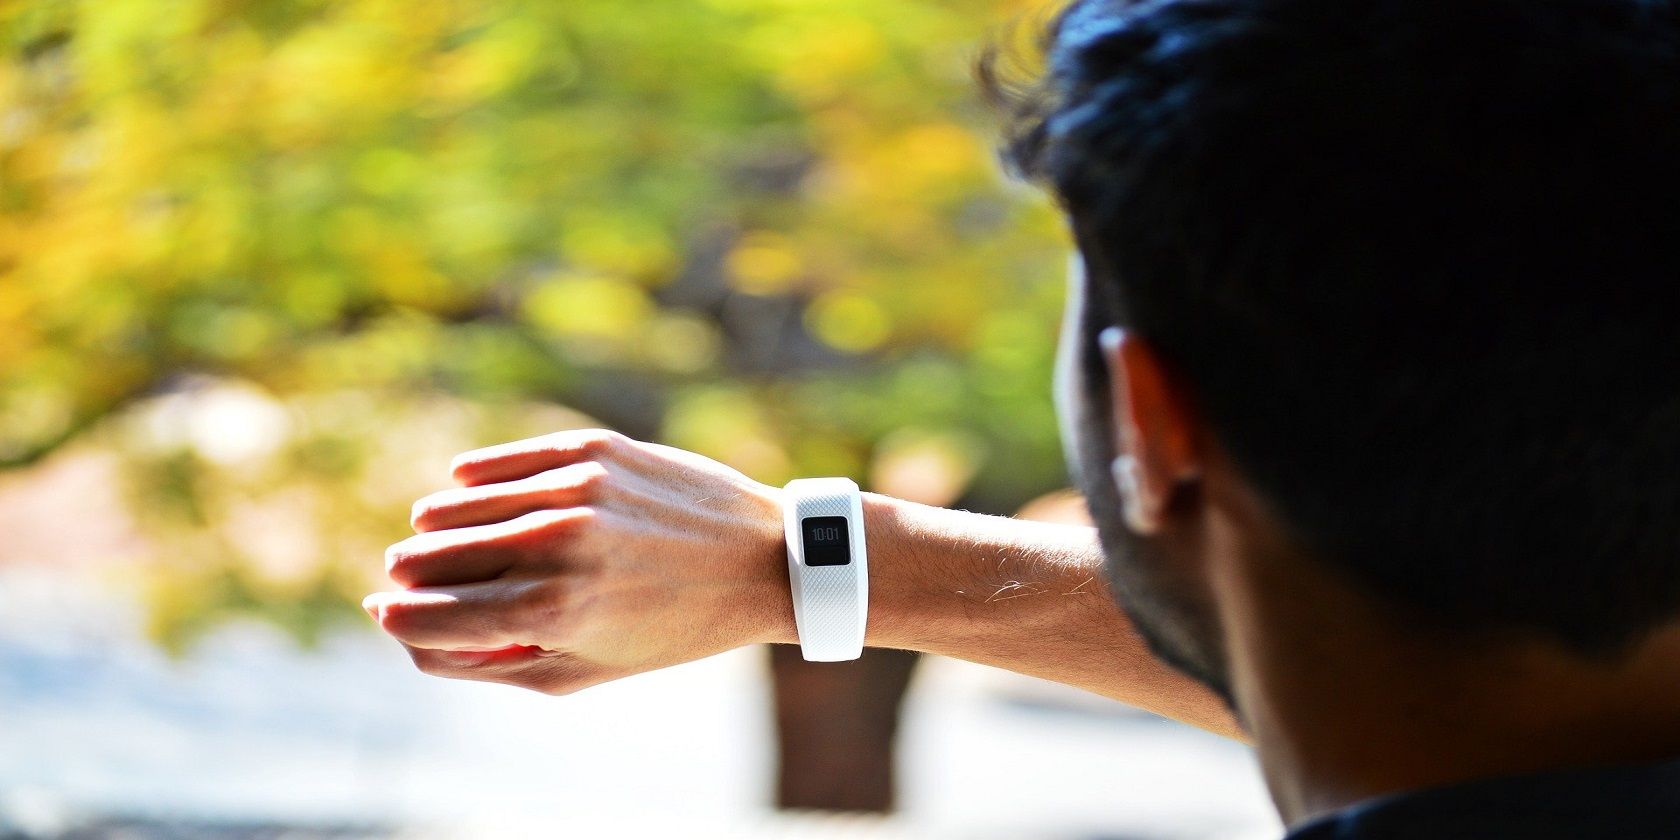 wearable fitness activity tracking device on man's wrist